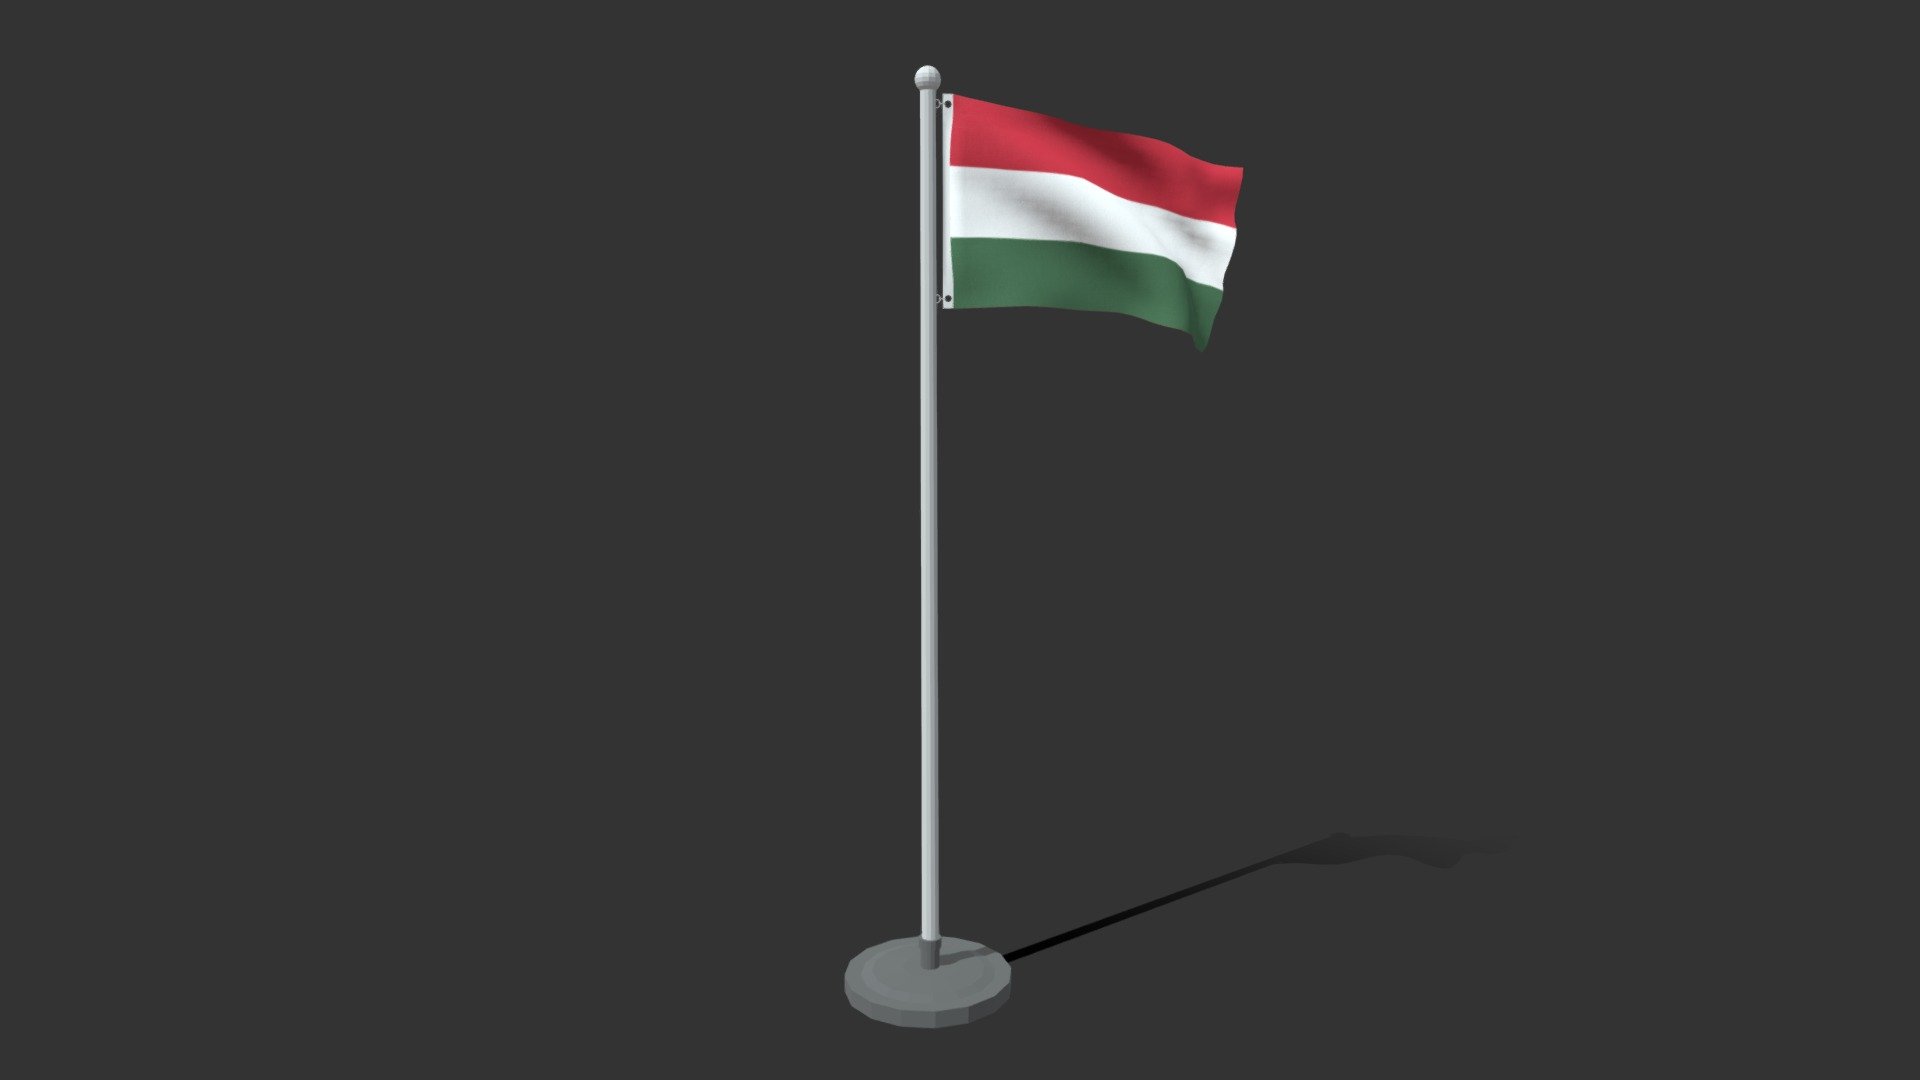 This is a low poly 3D model of an animated flag of Hungary. The low poly flag was modeled and prepared for low-poly style renderings, background, general CG visualization presented as 2 meshes with quads only.

Verts : 1.536 Faces : 1.459.

1024x1024 textures included. Diffuse, roughness and normal maps available only for flag. The pole have simple materials with colors.

The animation is based on shapekeys, 248 frames and seamless, no rig included.

The original file was created in blender. You will receive a OBJ, FBX, blend, DAE, Stl, gLTF, abc.

PLEASE NOTE Animation icluded only in blend, abc and glTF files.

Warning: Depending on which software package you are using, the exchange formats (.obj , .dae, .fbx) may not match the preview images exactly. Due to the nature of these formats, there may be some textures that have to be loaded by hand and possibly triangulated geometry 3d model